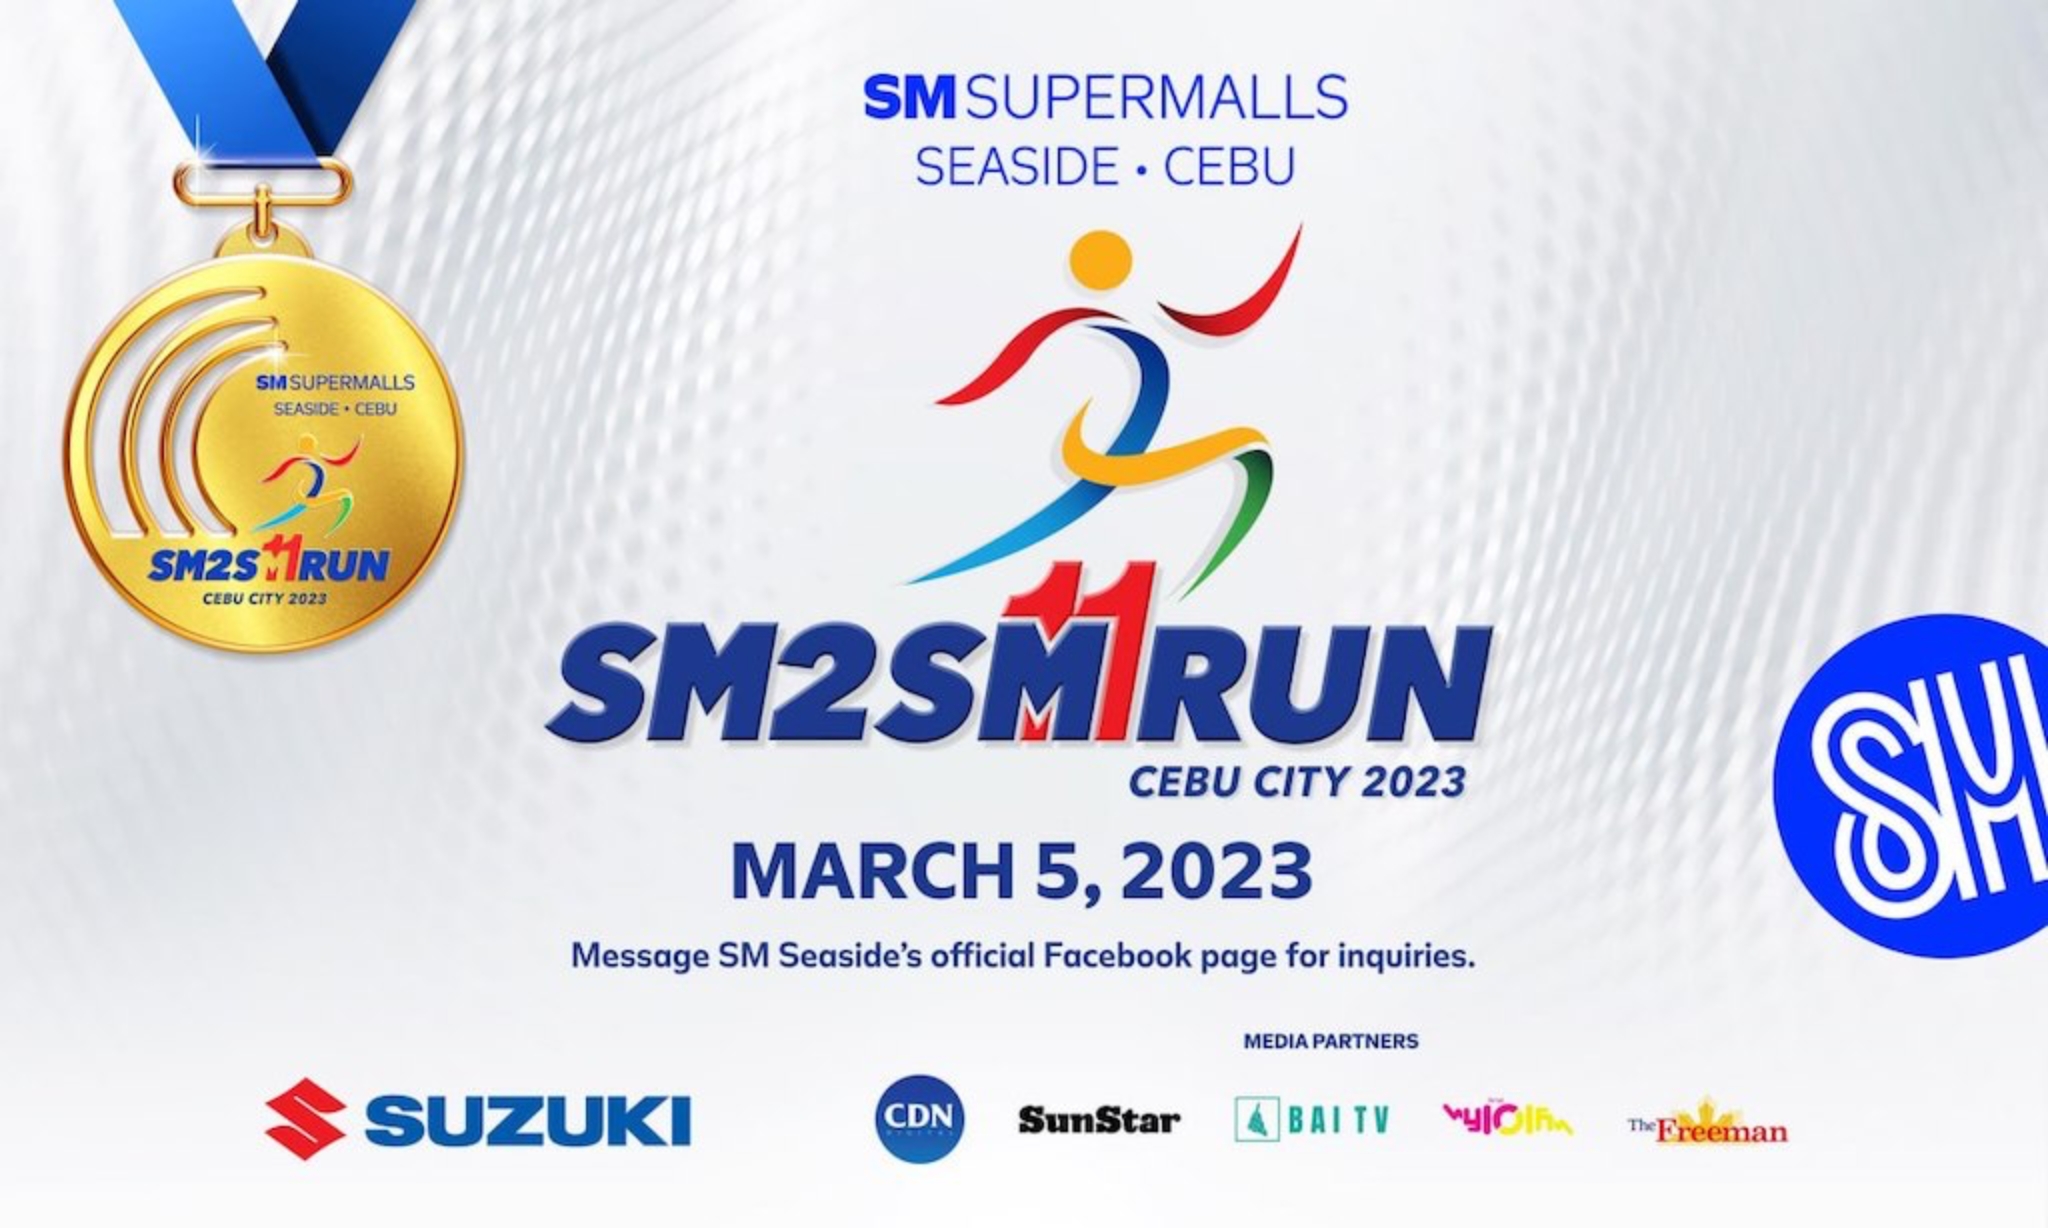 SM2SM Run Dangles Huge Cash Prizes, Smart TVs, Mobile Phones, Branded Eyewear & A Brand New Car; Attracts Over 9,500 Run